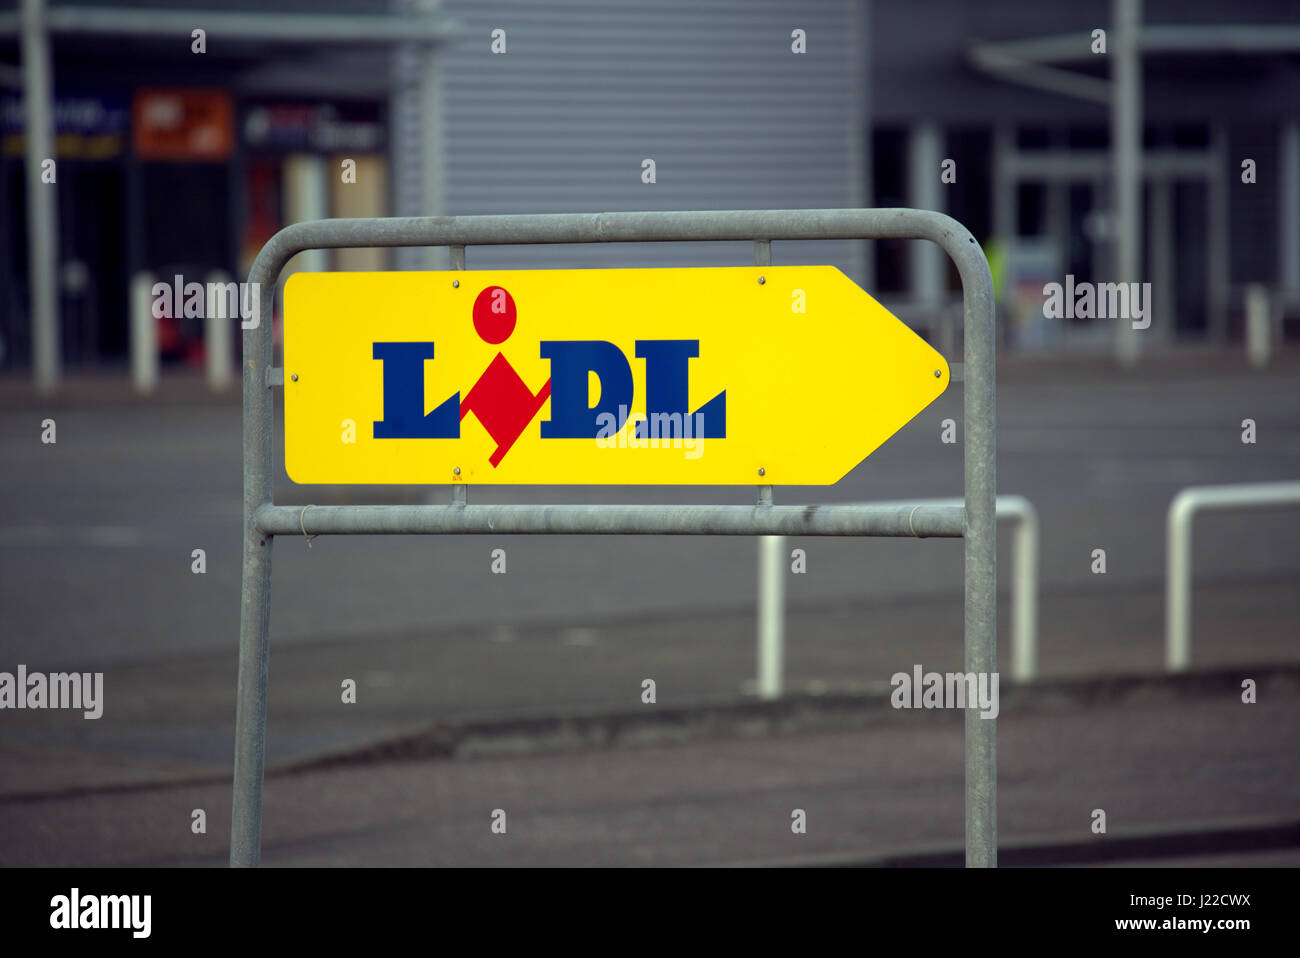 Lidl lidl LIDL  pointing arrow sign Stock Photo